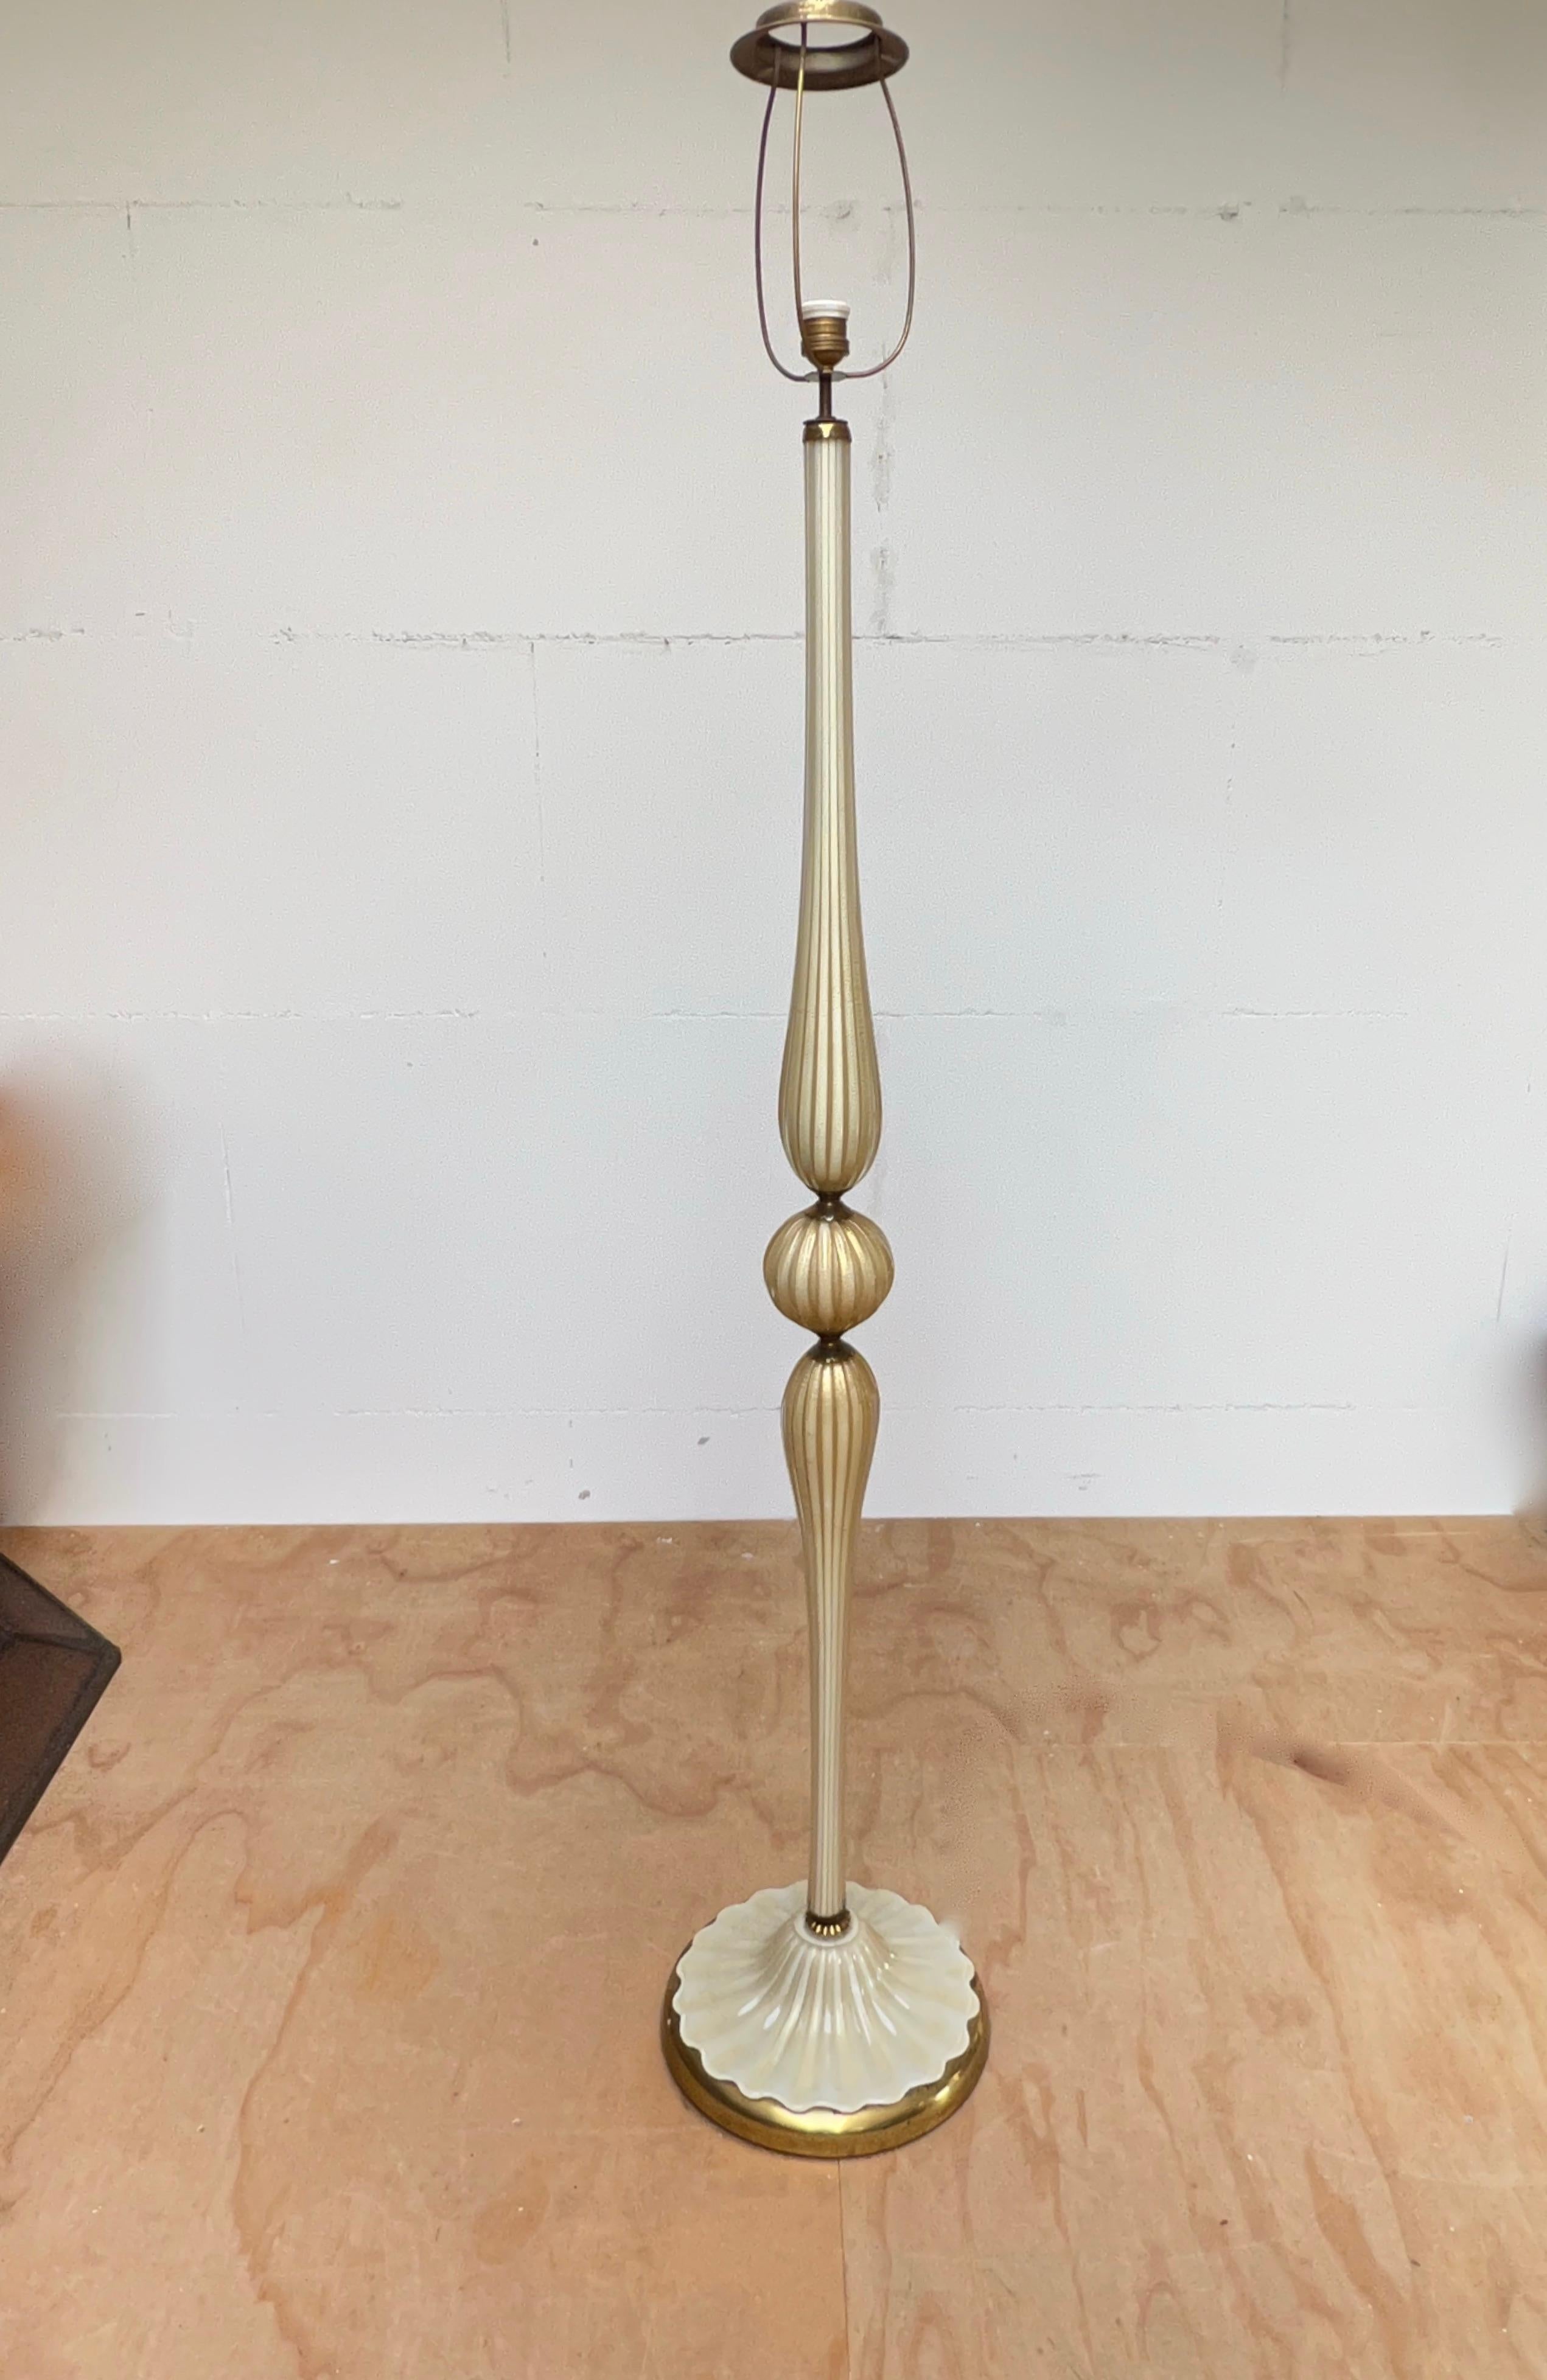 Highly stylish and cool looking glass art floor lamp from mid-century Italy.

For the collectors and enthousiasts of Italian Murano glass art, we are offering this very rare and stylish floor lamp. It is put together by hand and entirely made of